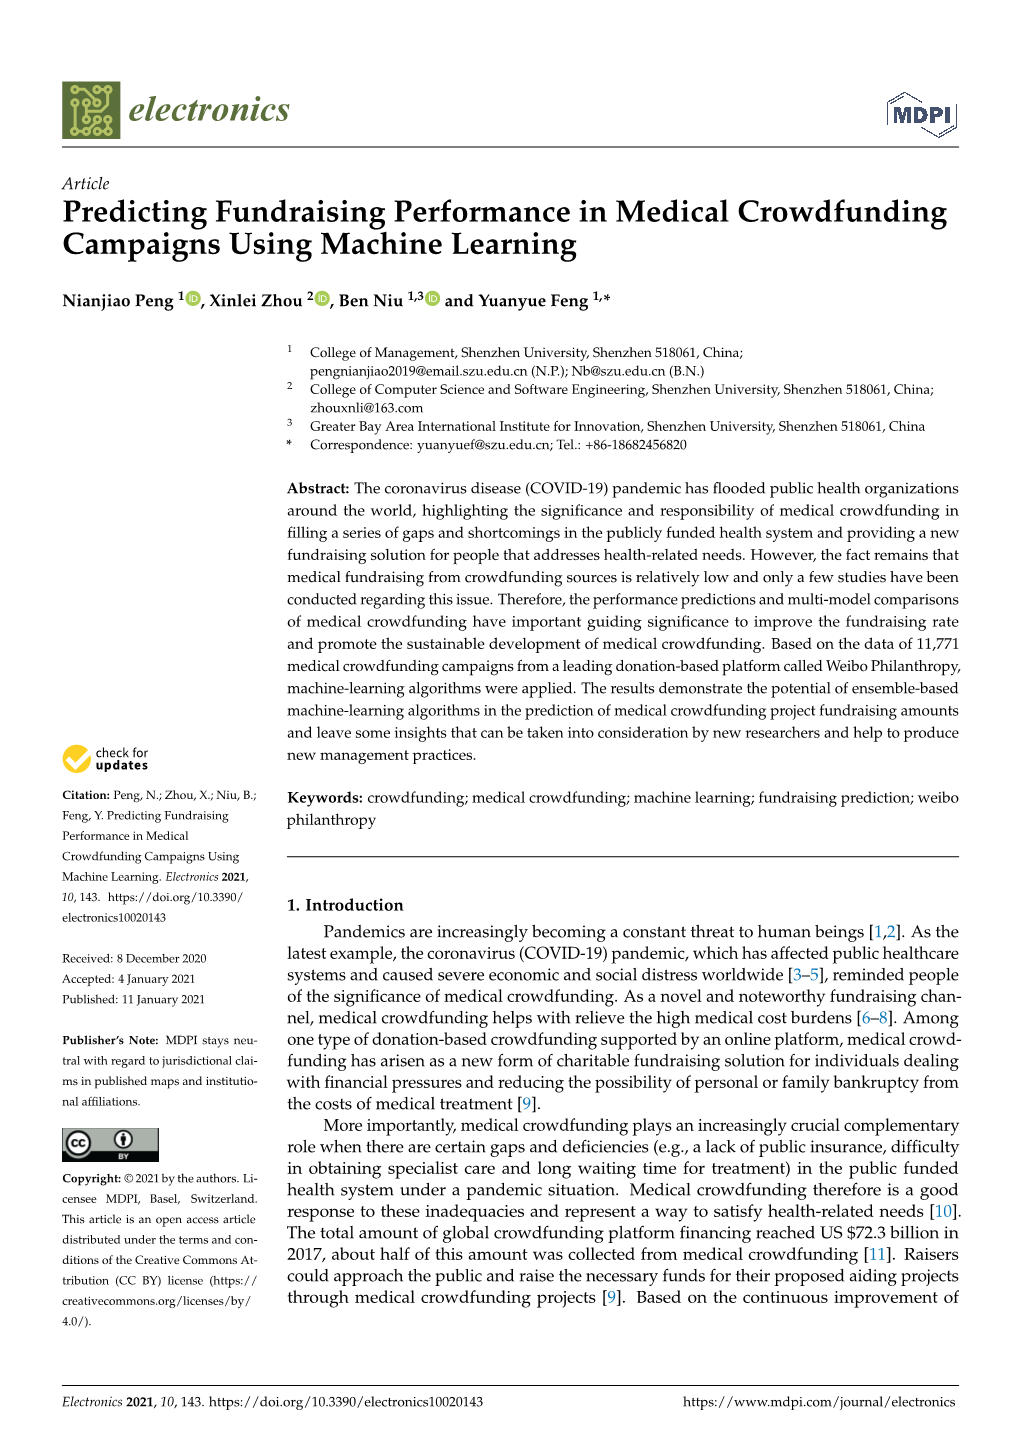 Predicting Fundraising Performance in Medical Crowdfunding Campaigns Using Machine Learning